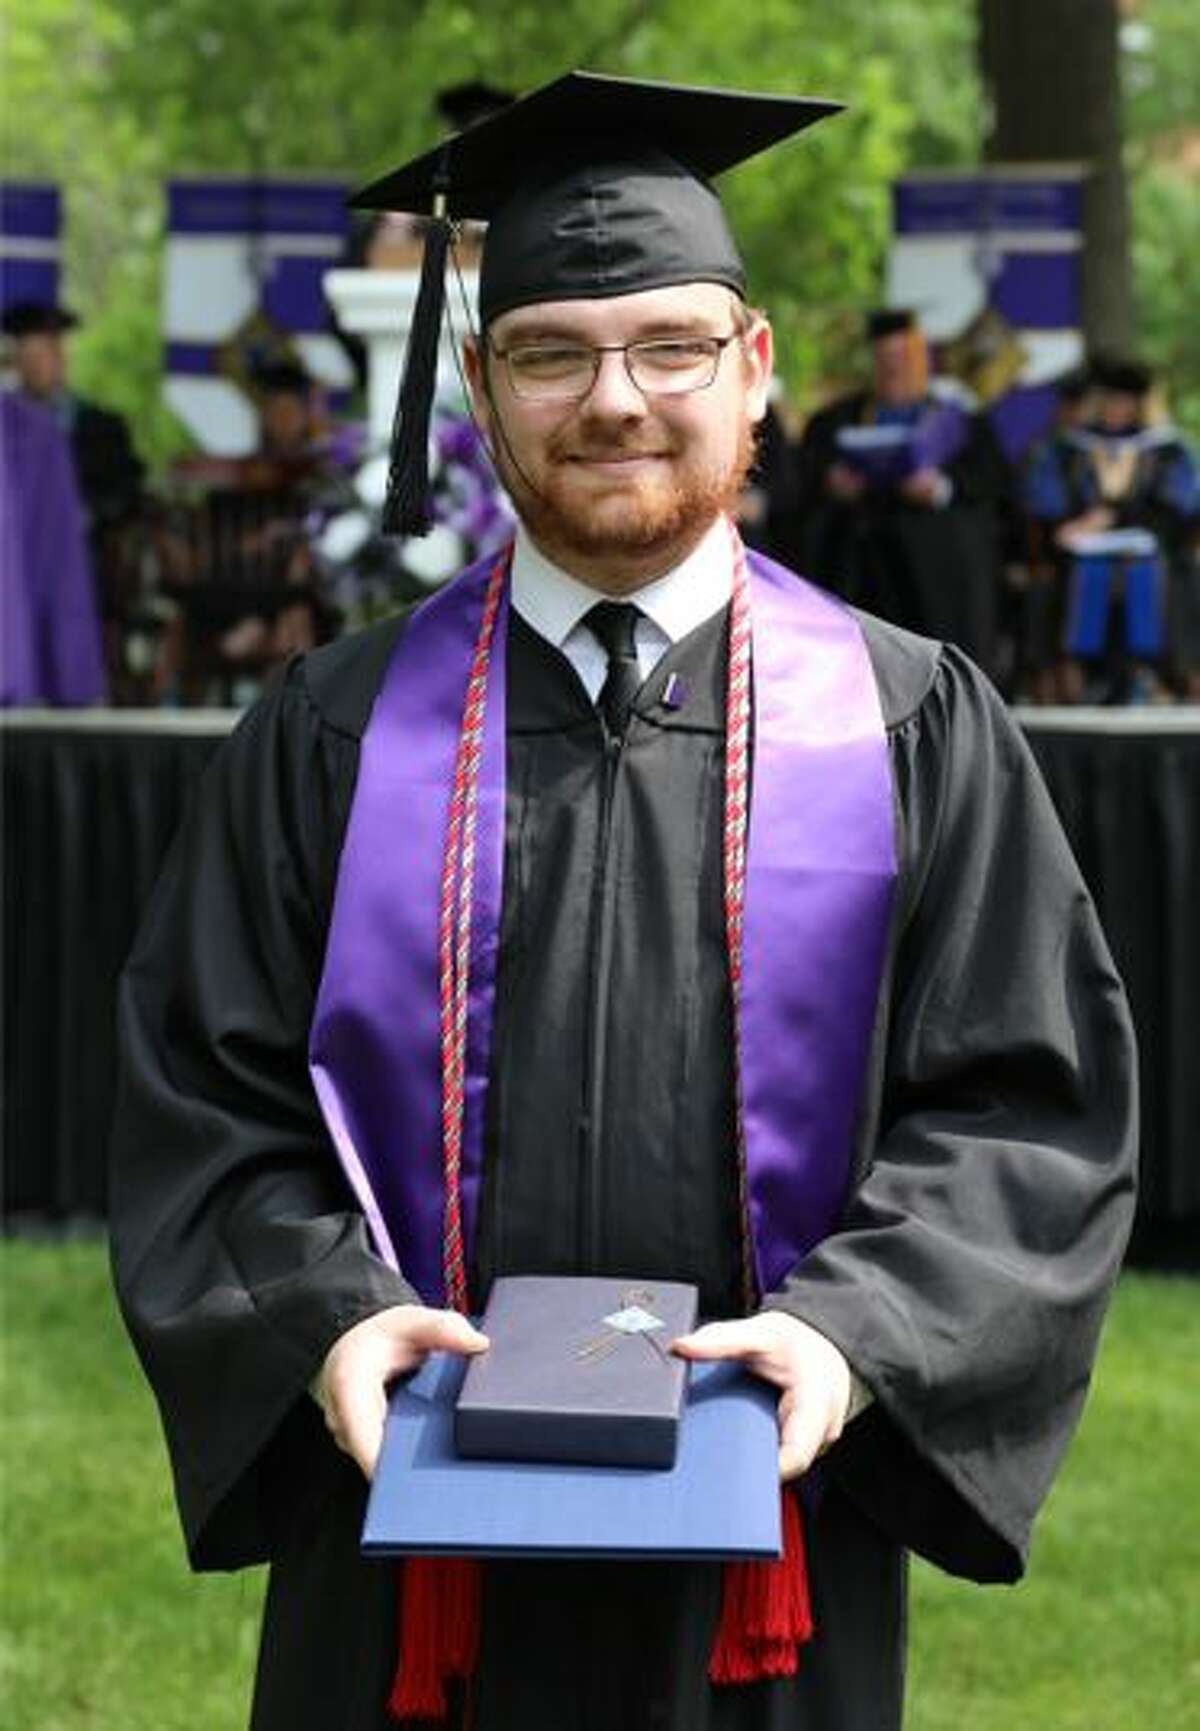 Kyle Garrett of Troy, who recently graduated with a Bachelor of Science degree in chemistry from McKendree University, received the 2021 Technos International Prize. 